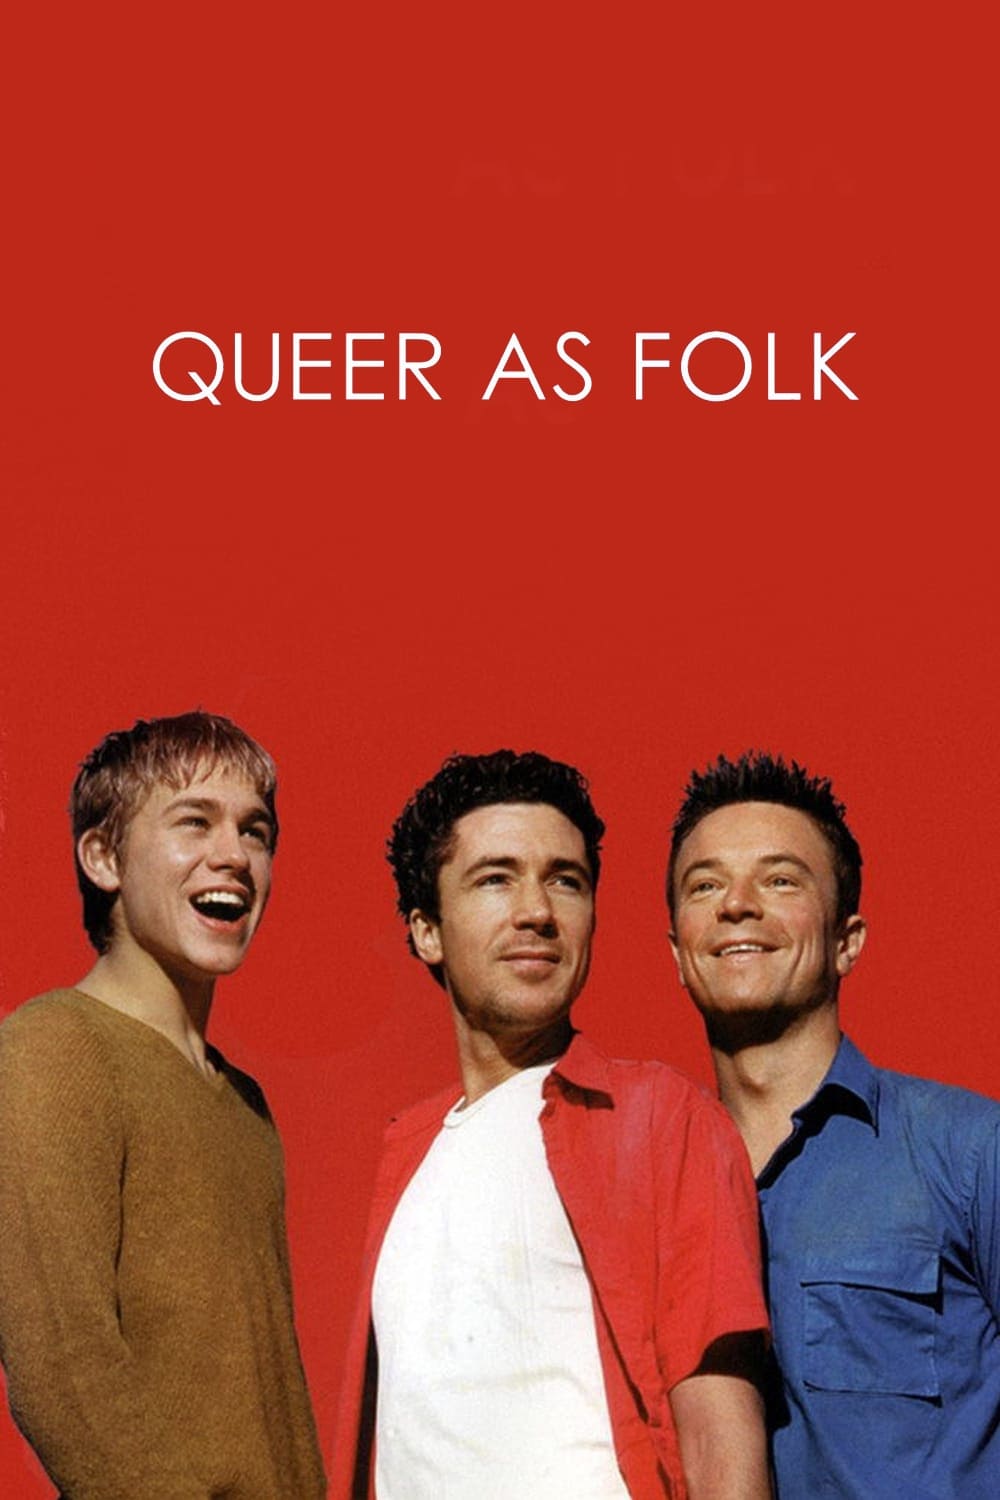 Queer as Folk TV Shows About Manchester